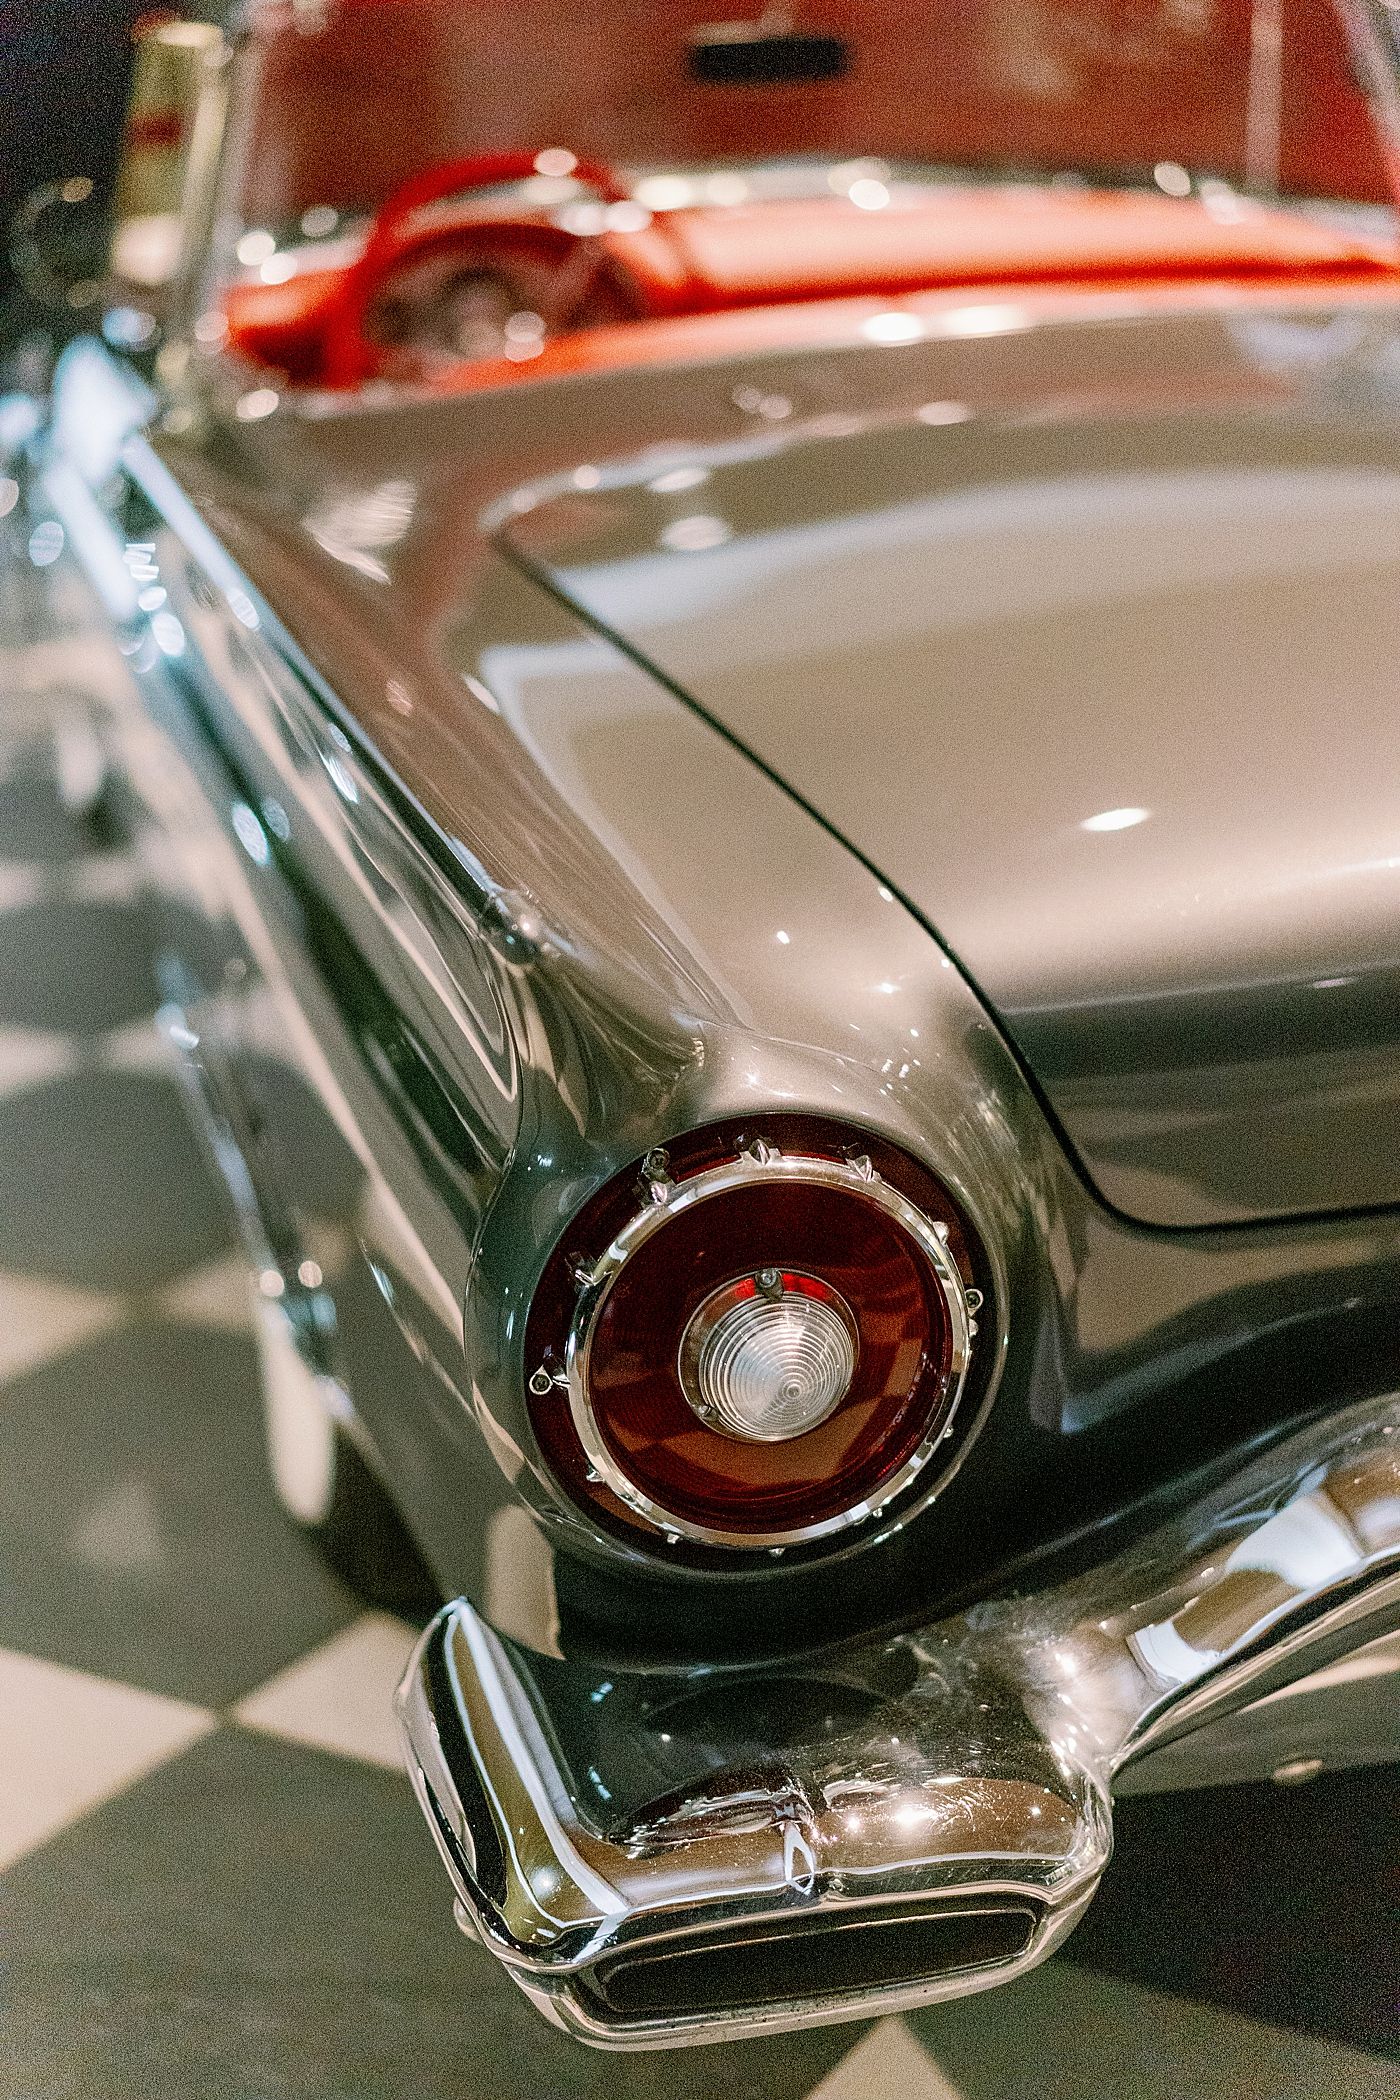 Detail photo of a vintage gray thunderbird | Photo by Annie Laura Photography